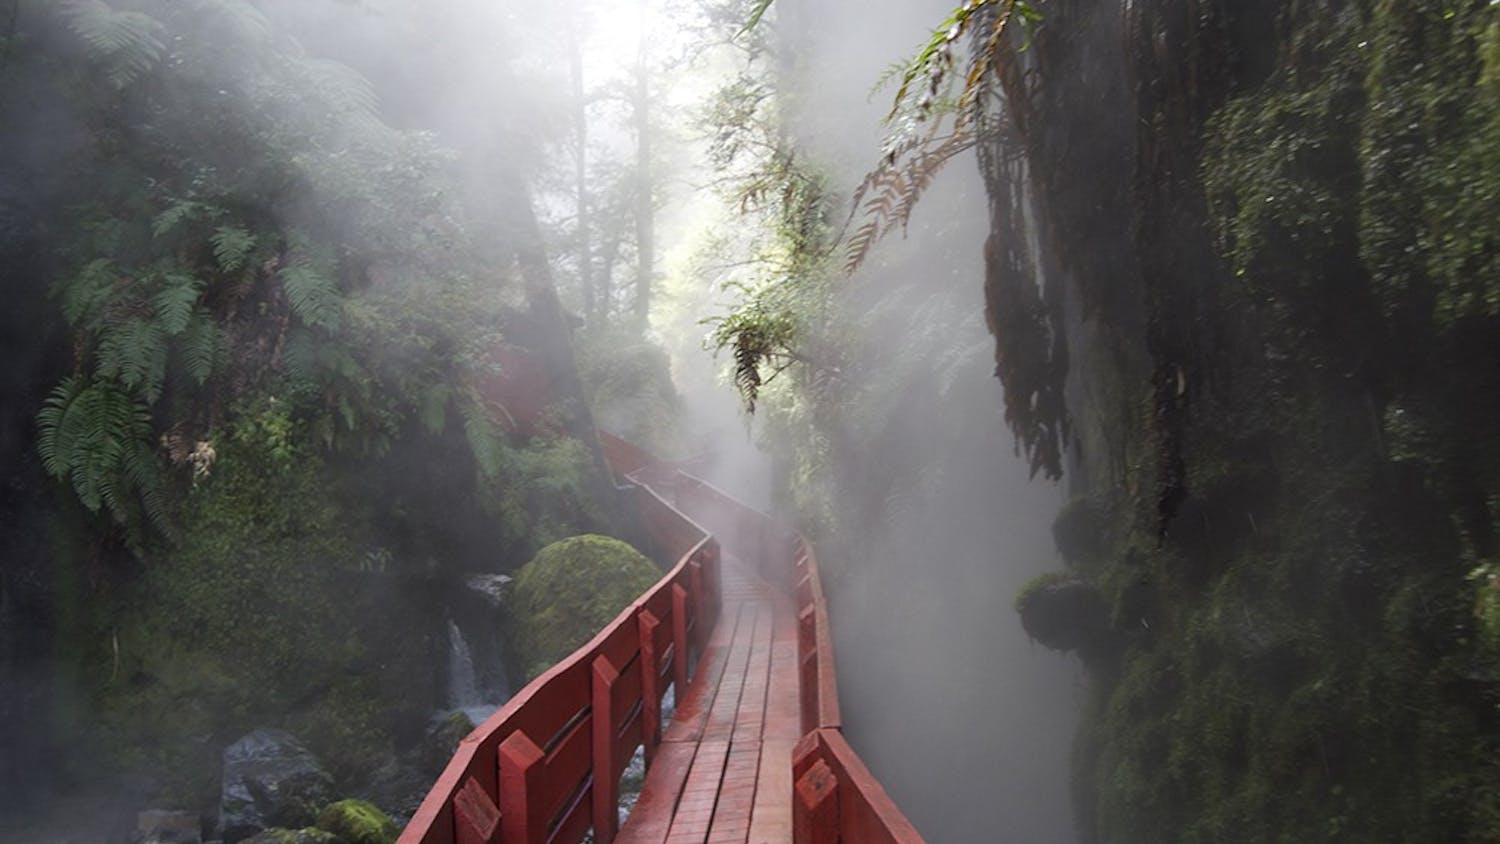  A red, wooden walkway leads visitors to the different pools the Hot Springs has to offer, and at the end of the walkway a waterfall greets viewers eyes. Though the pools are hot, the waterfall and small river that run through the area are ice cold.